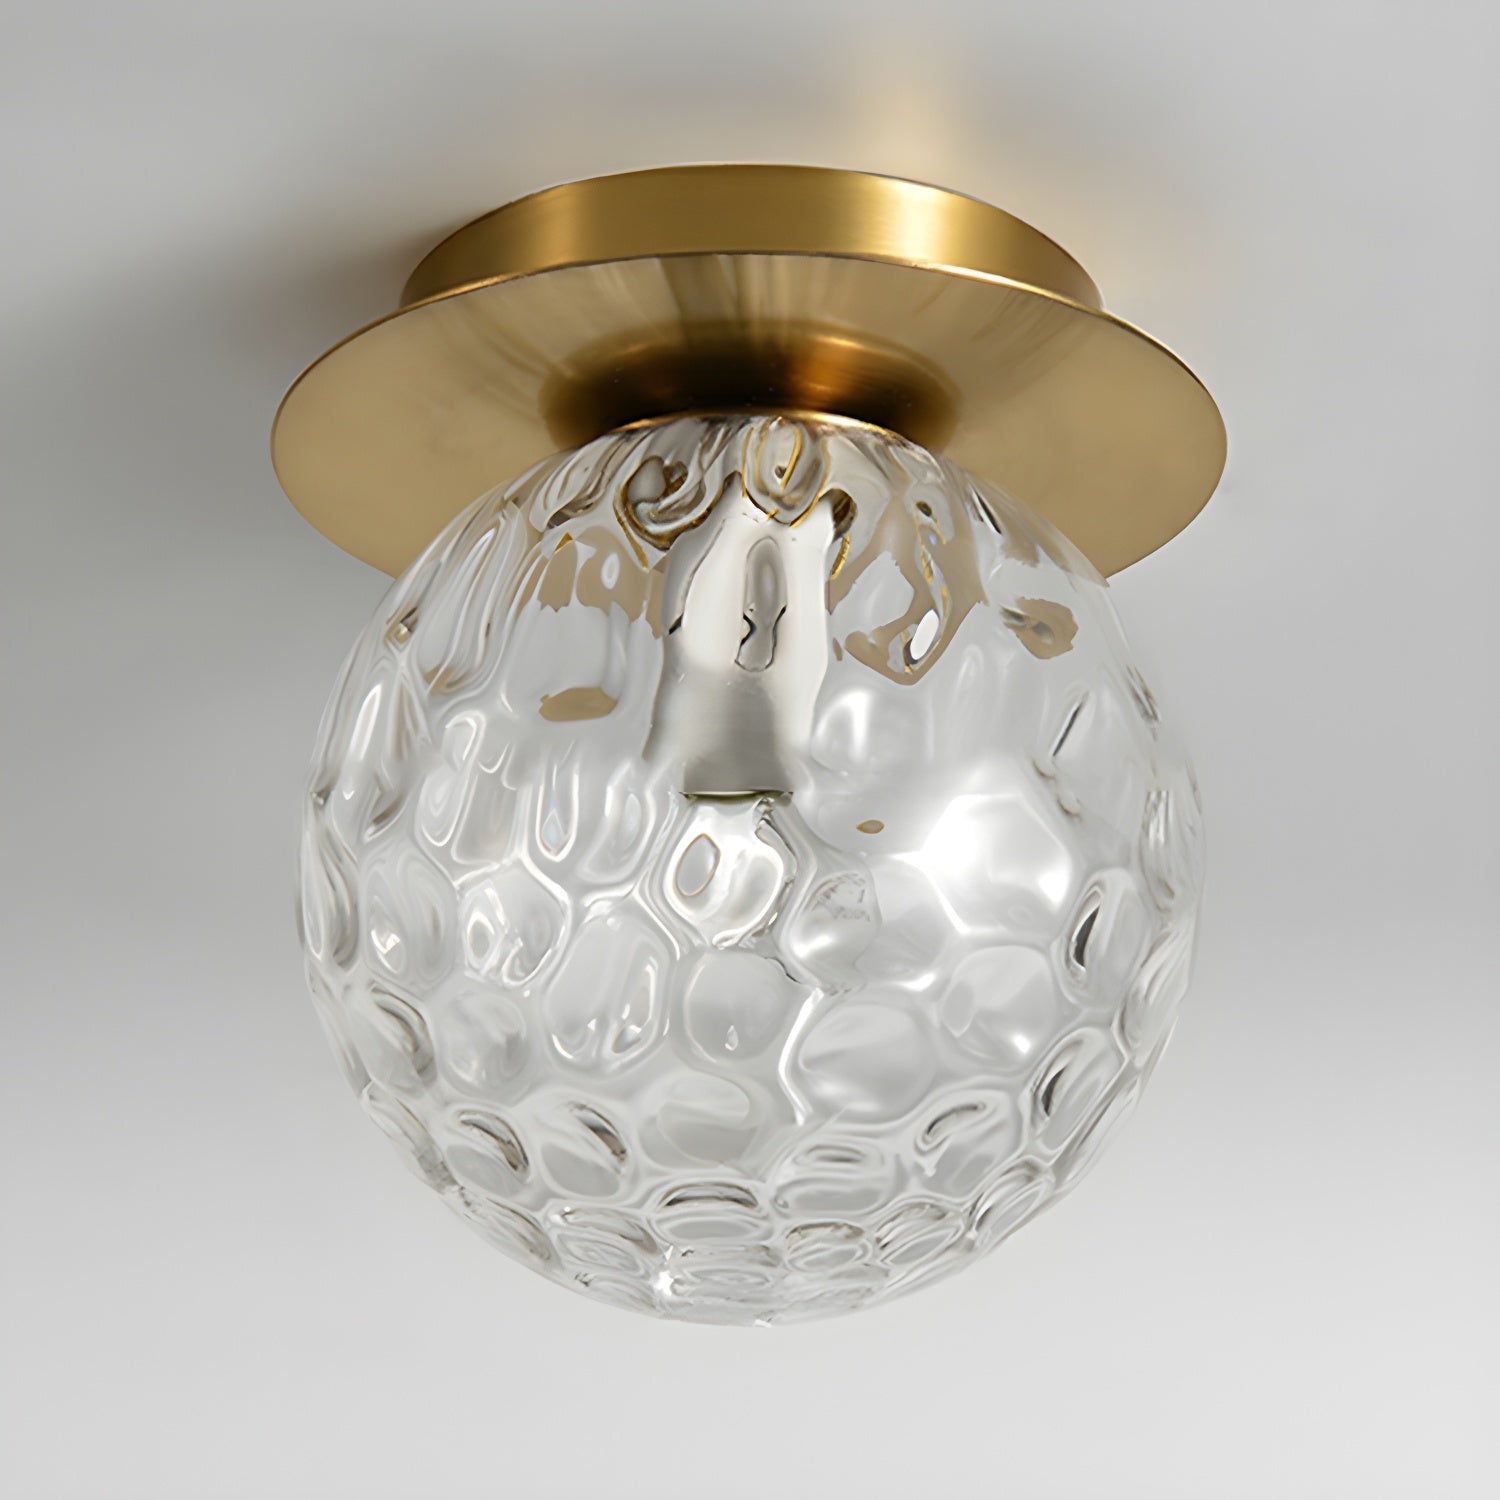 Small Glass Ceiling Light Fixture for Corridor -Homwarmy